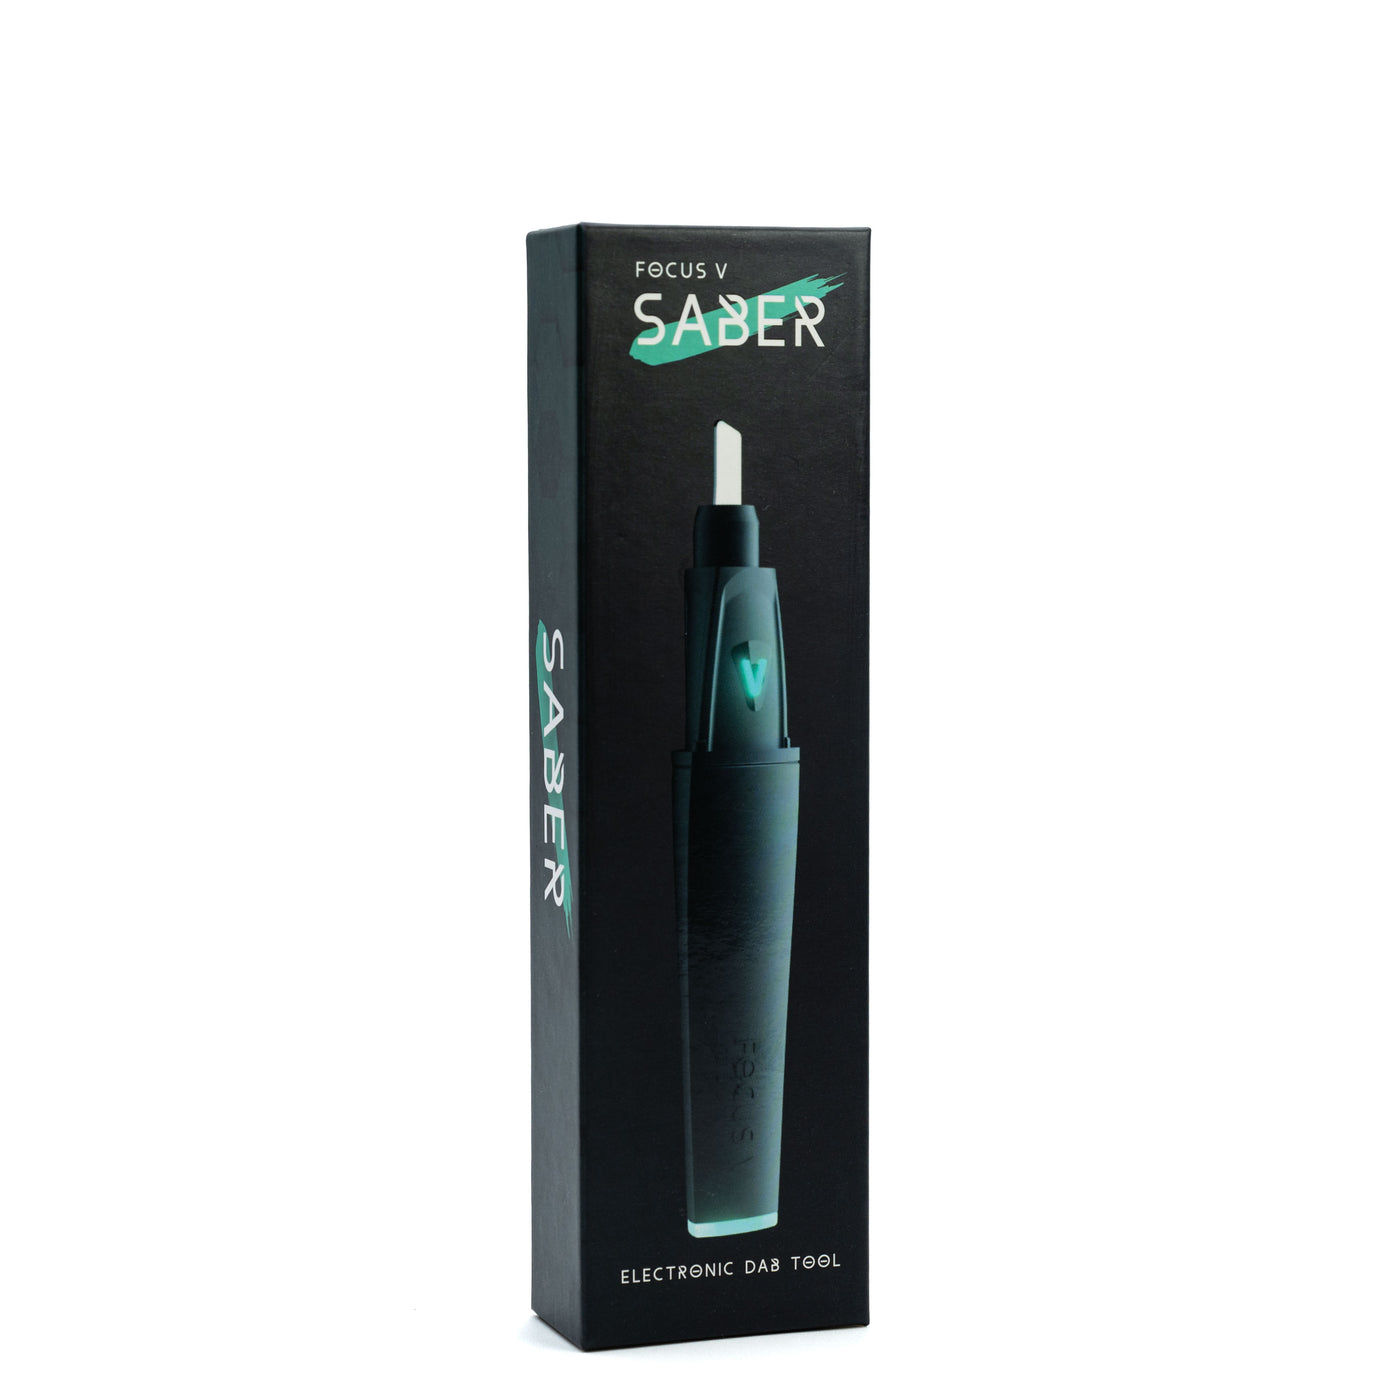 Focus V Saber is the best electronic dab tool allowing you to pick up concentrates with ease and drop them in your atomizer. Includes a flashlight and replaceable tips.